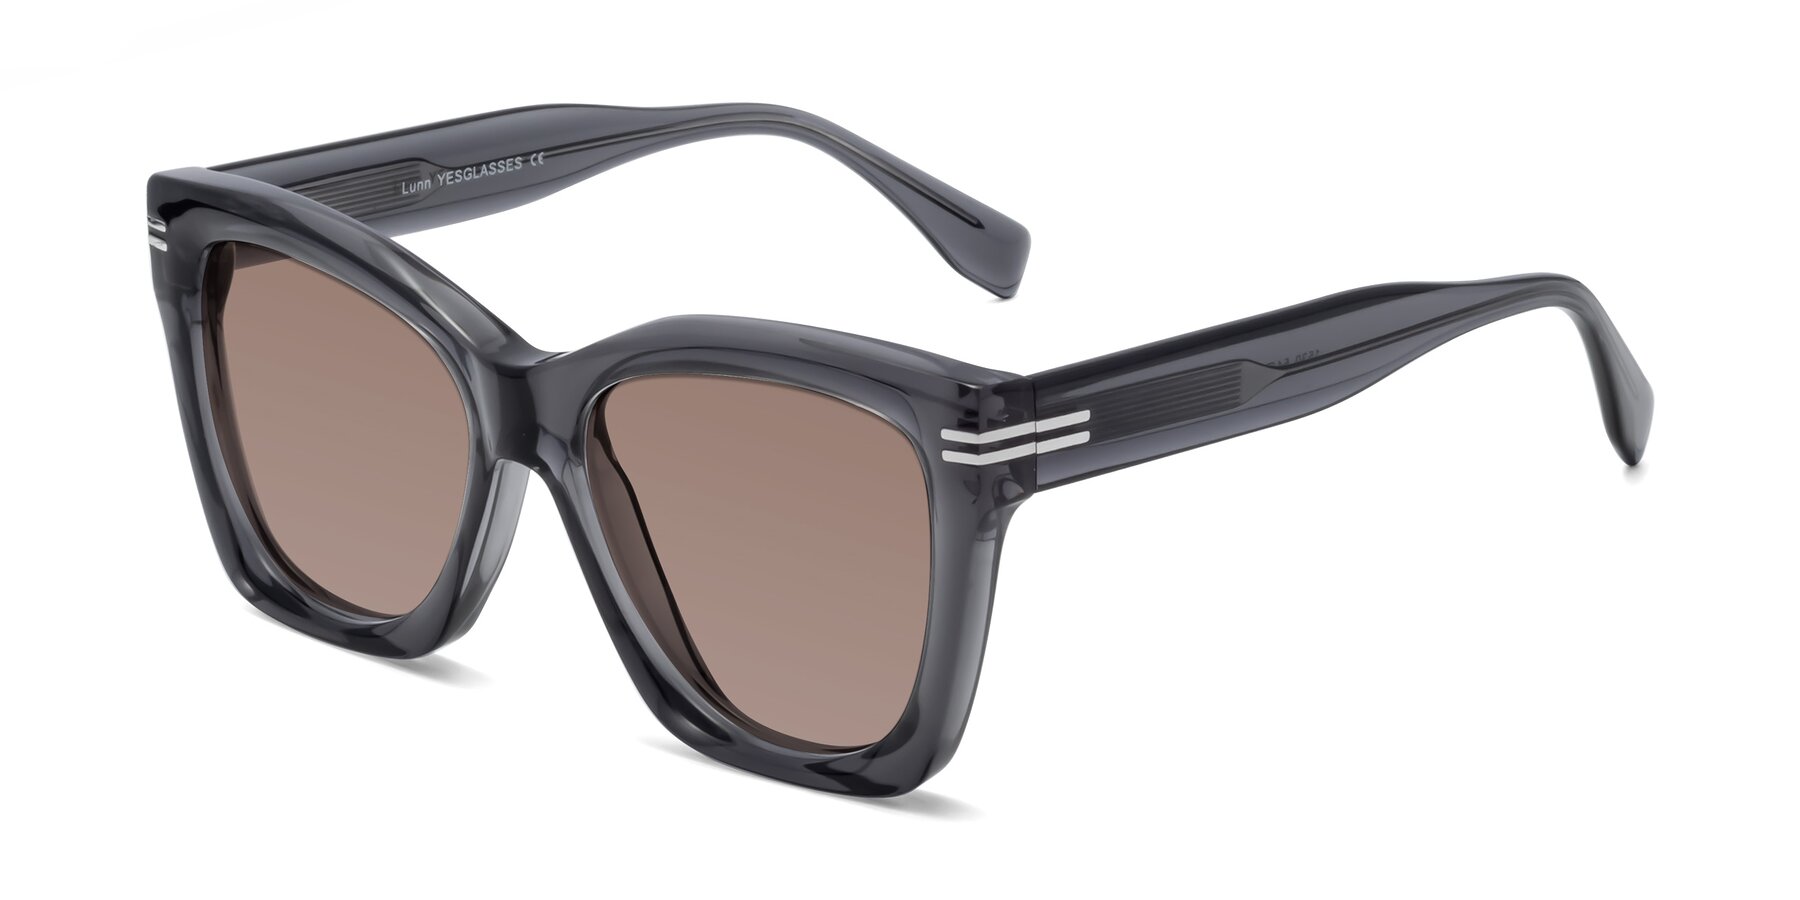 Angle of Lunn in Translucent Gray with Medium Brown Tinted Lenses